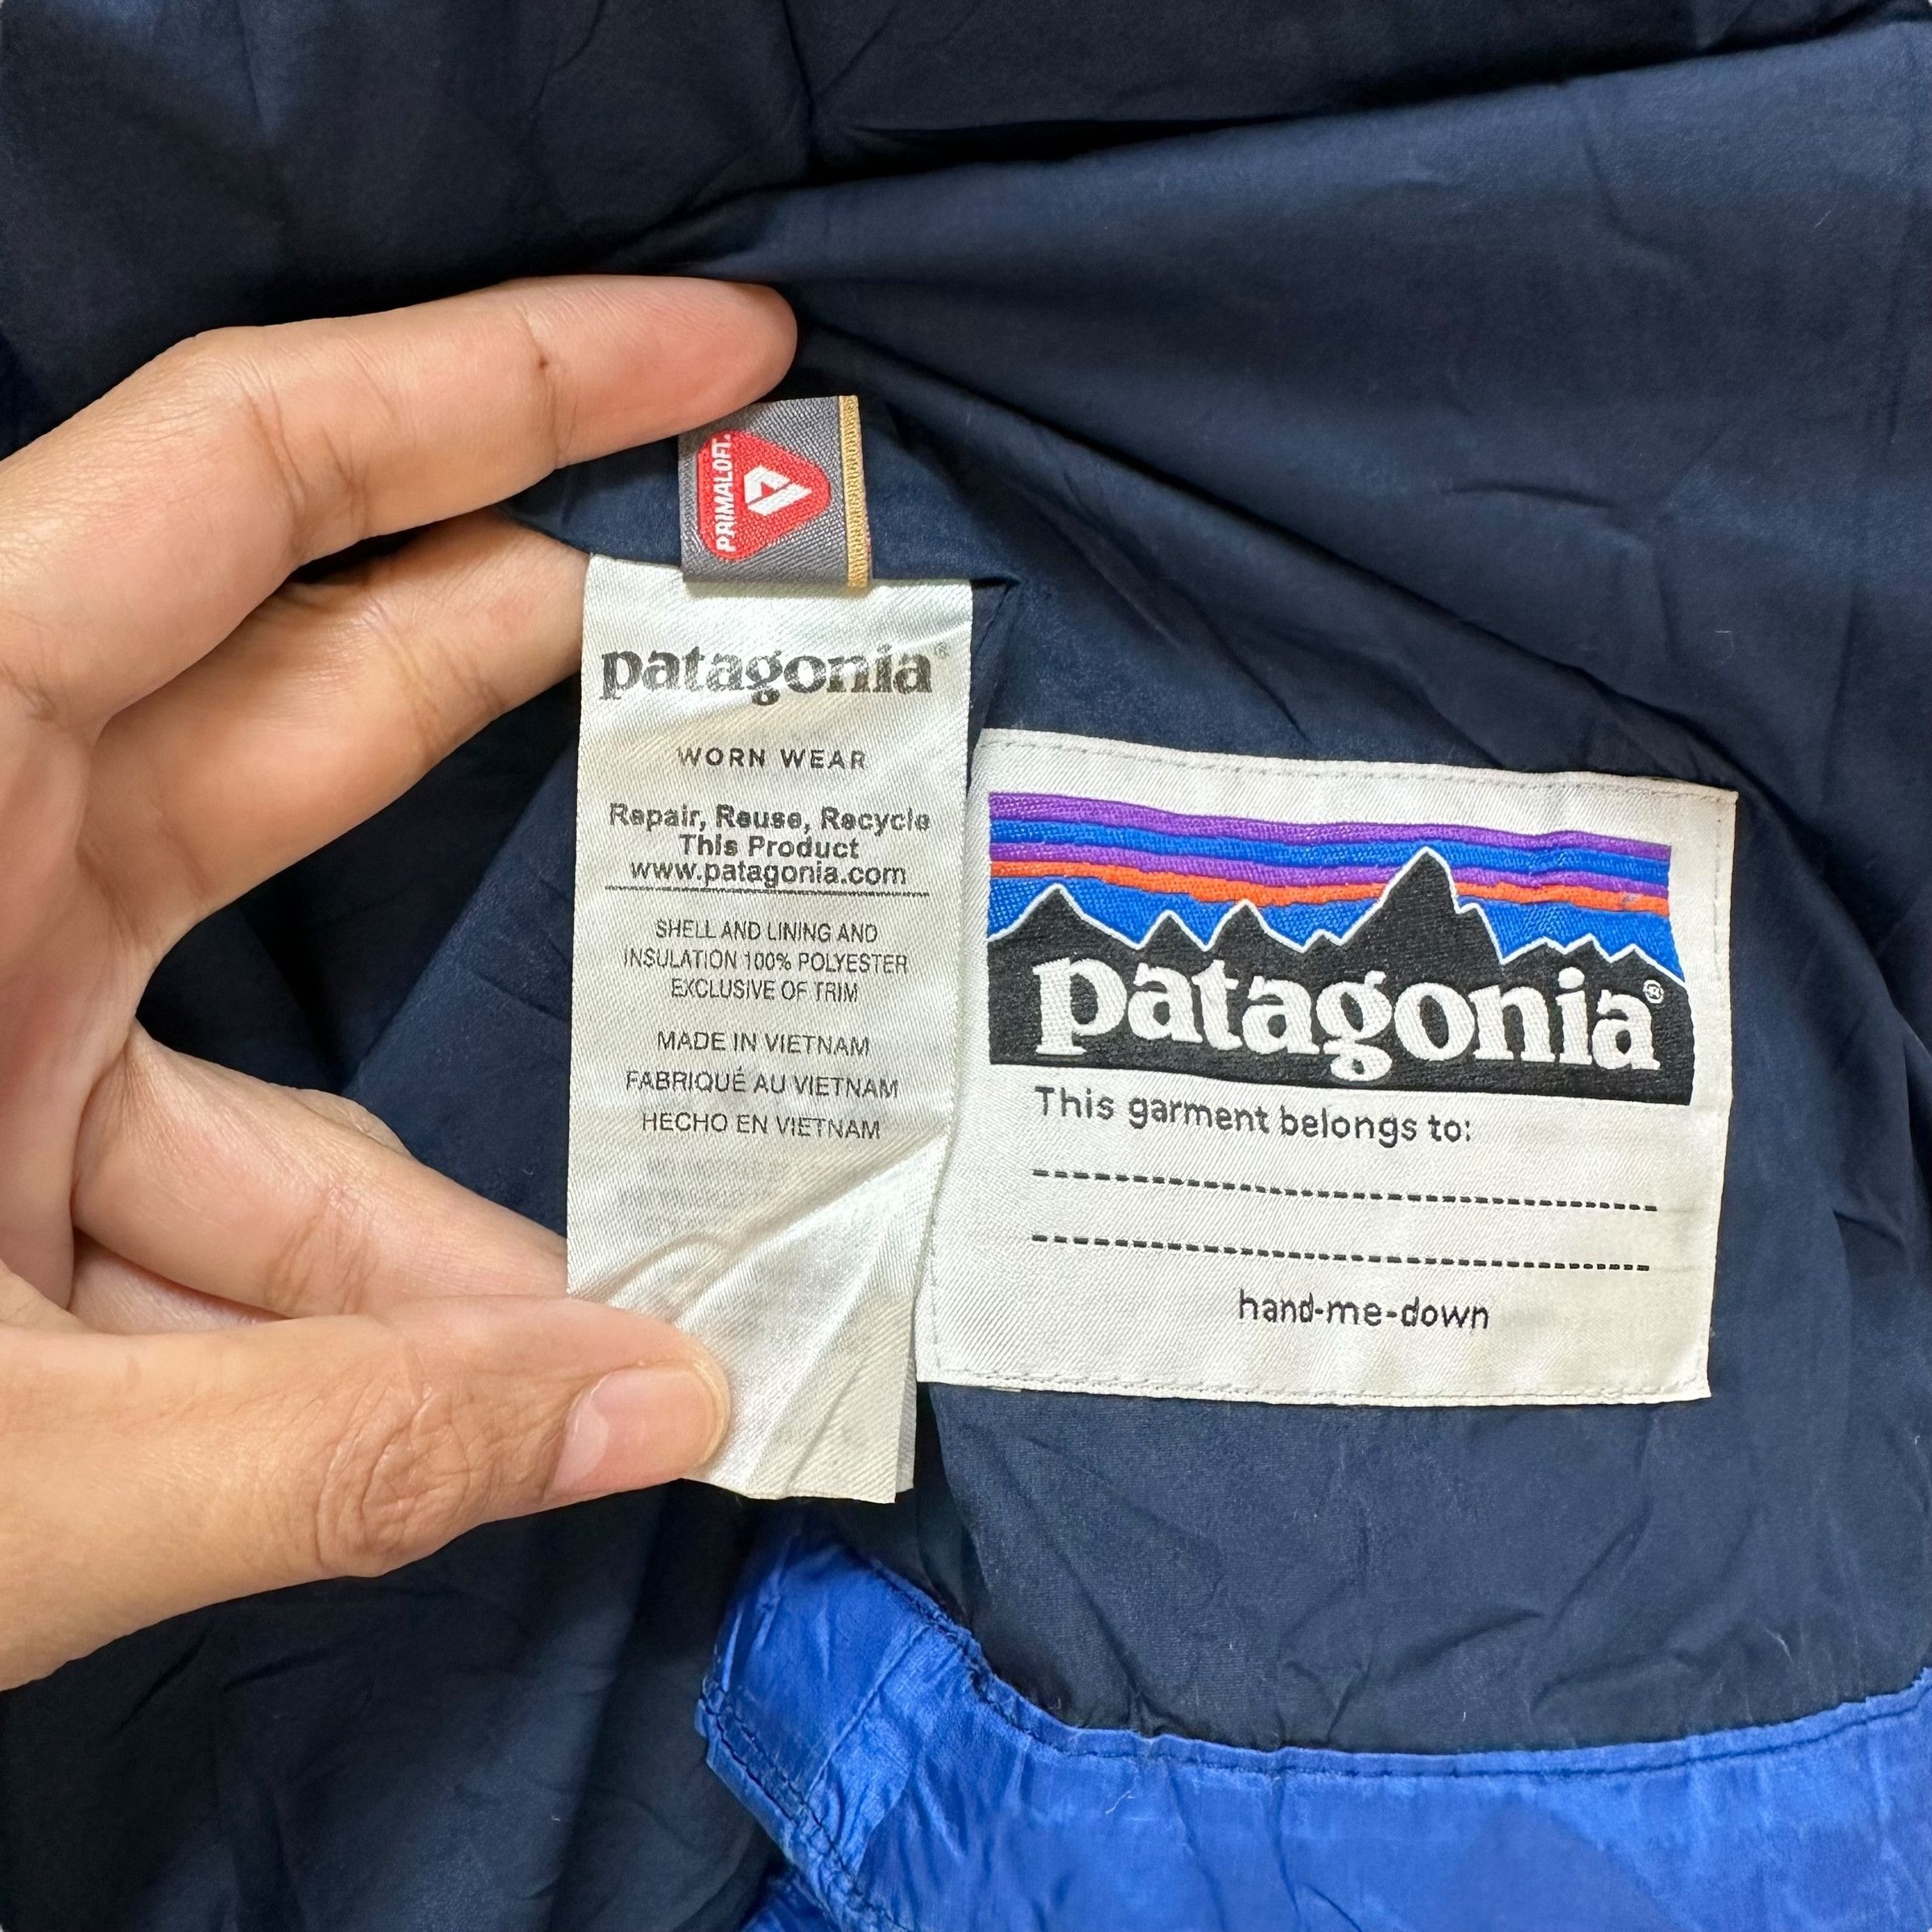 PATAGONIA LIGHT PUFFER JACKET IN BLUE FOR KIDS #9020-48 - 12